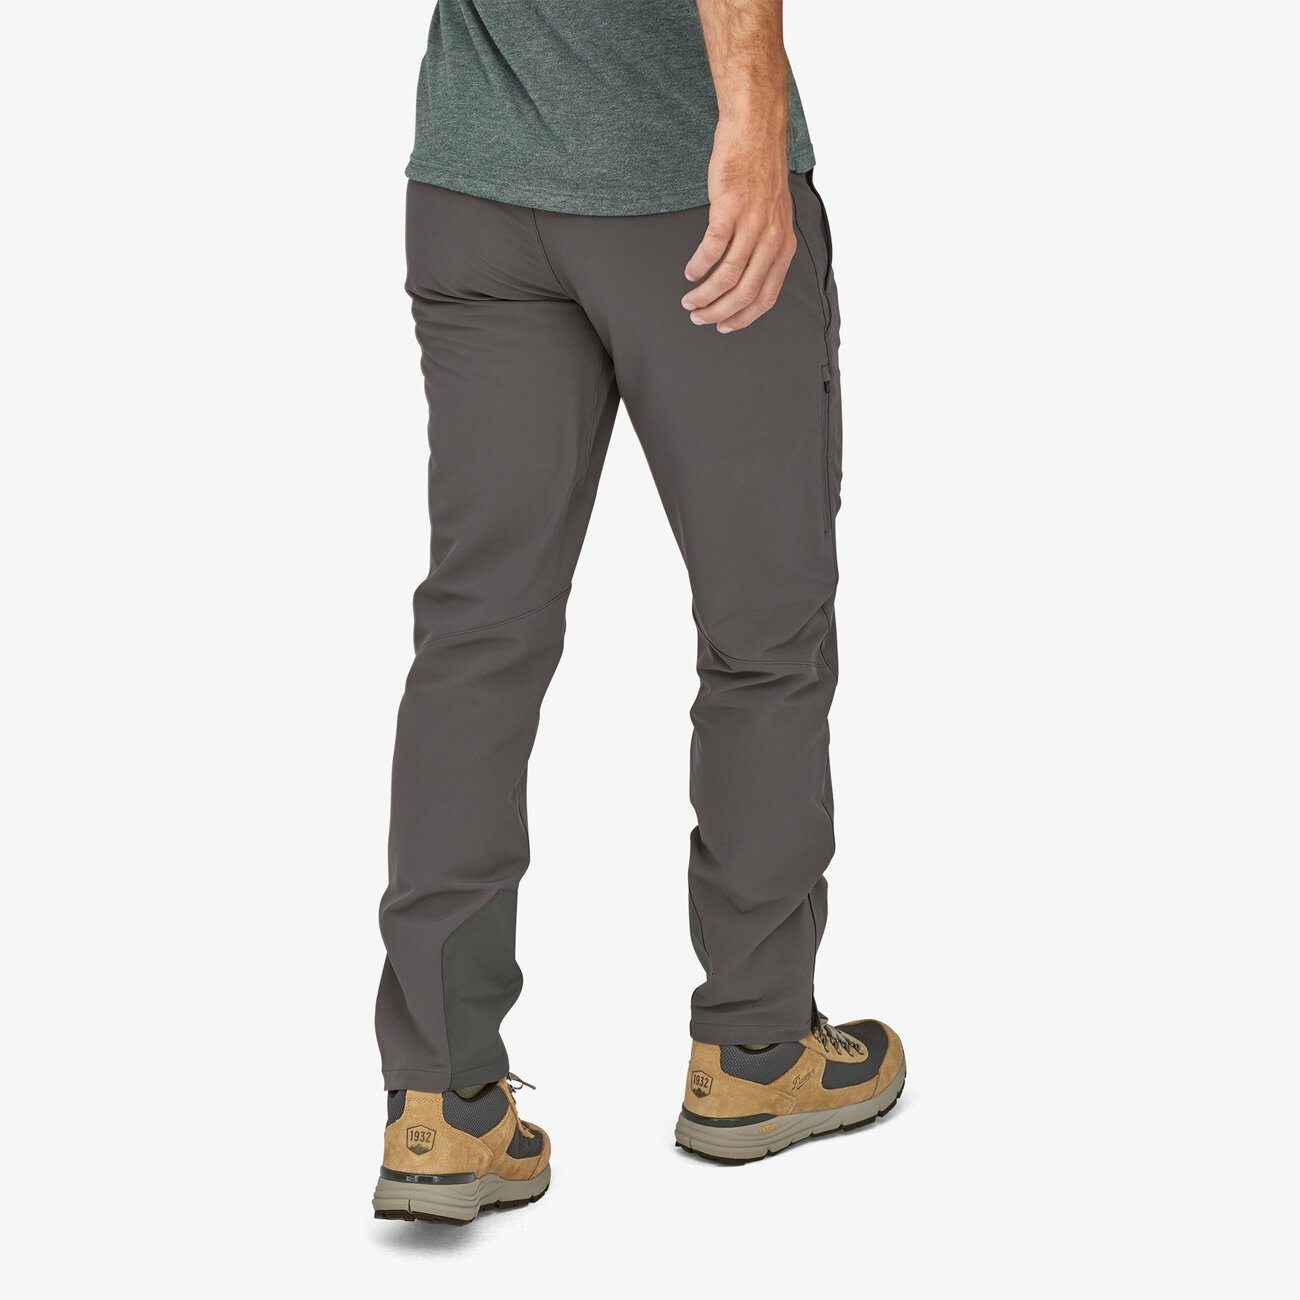 Patagonia M's Crestview Hiking Pants - Recycled Polyester Black Pants